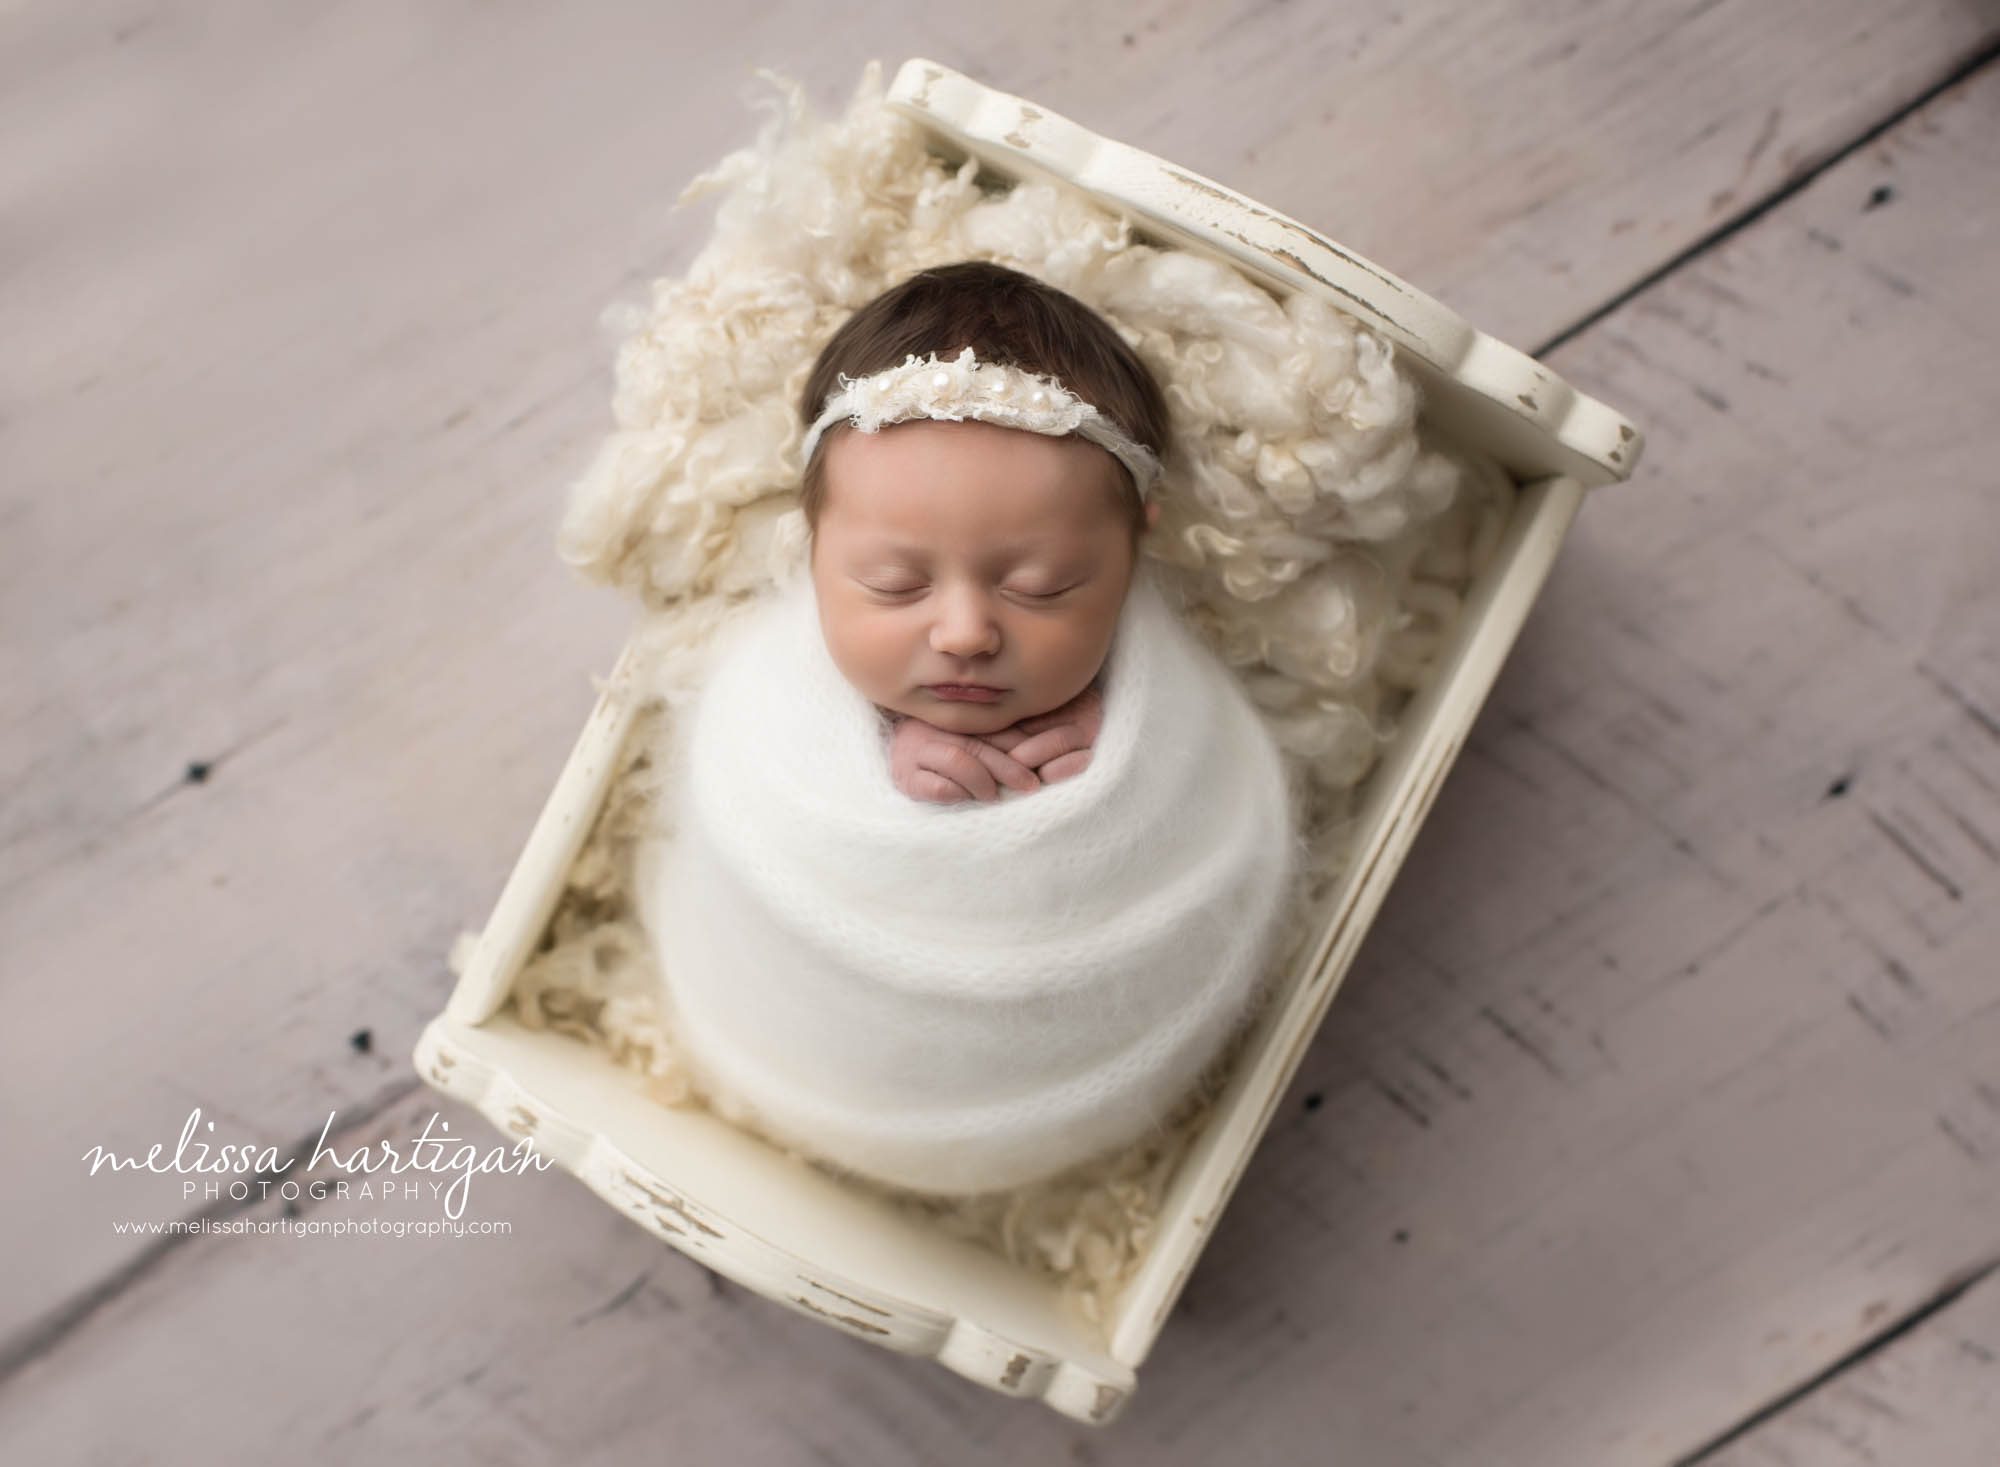 Leila CT Newborn Session baby girl sleeping in white wooden bed